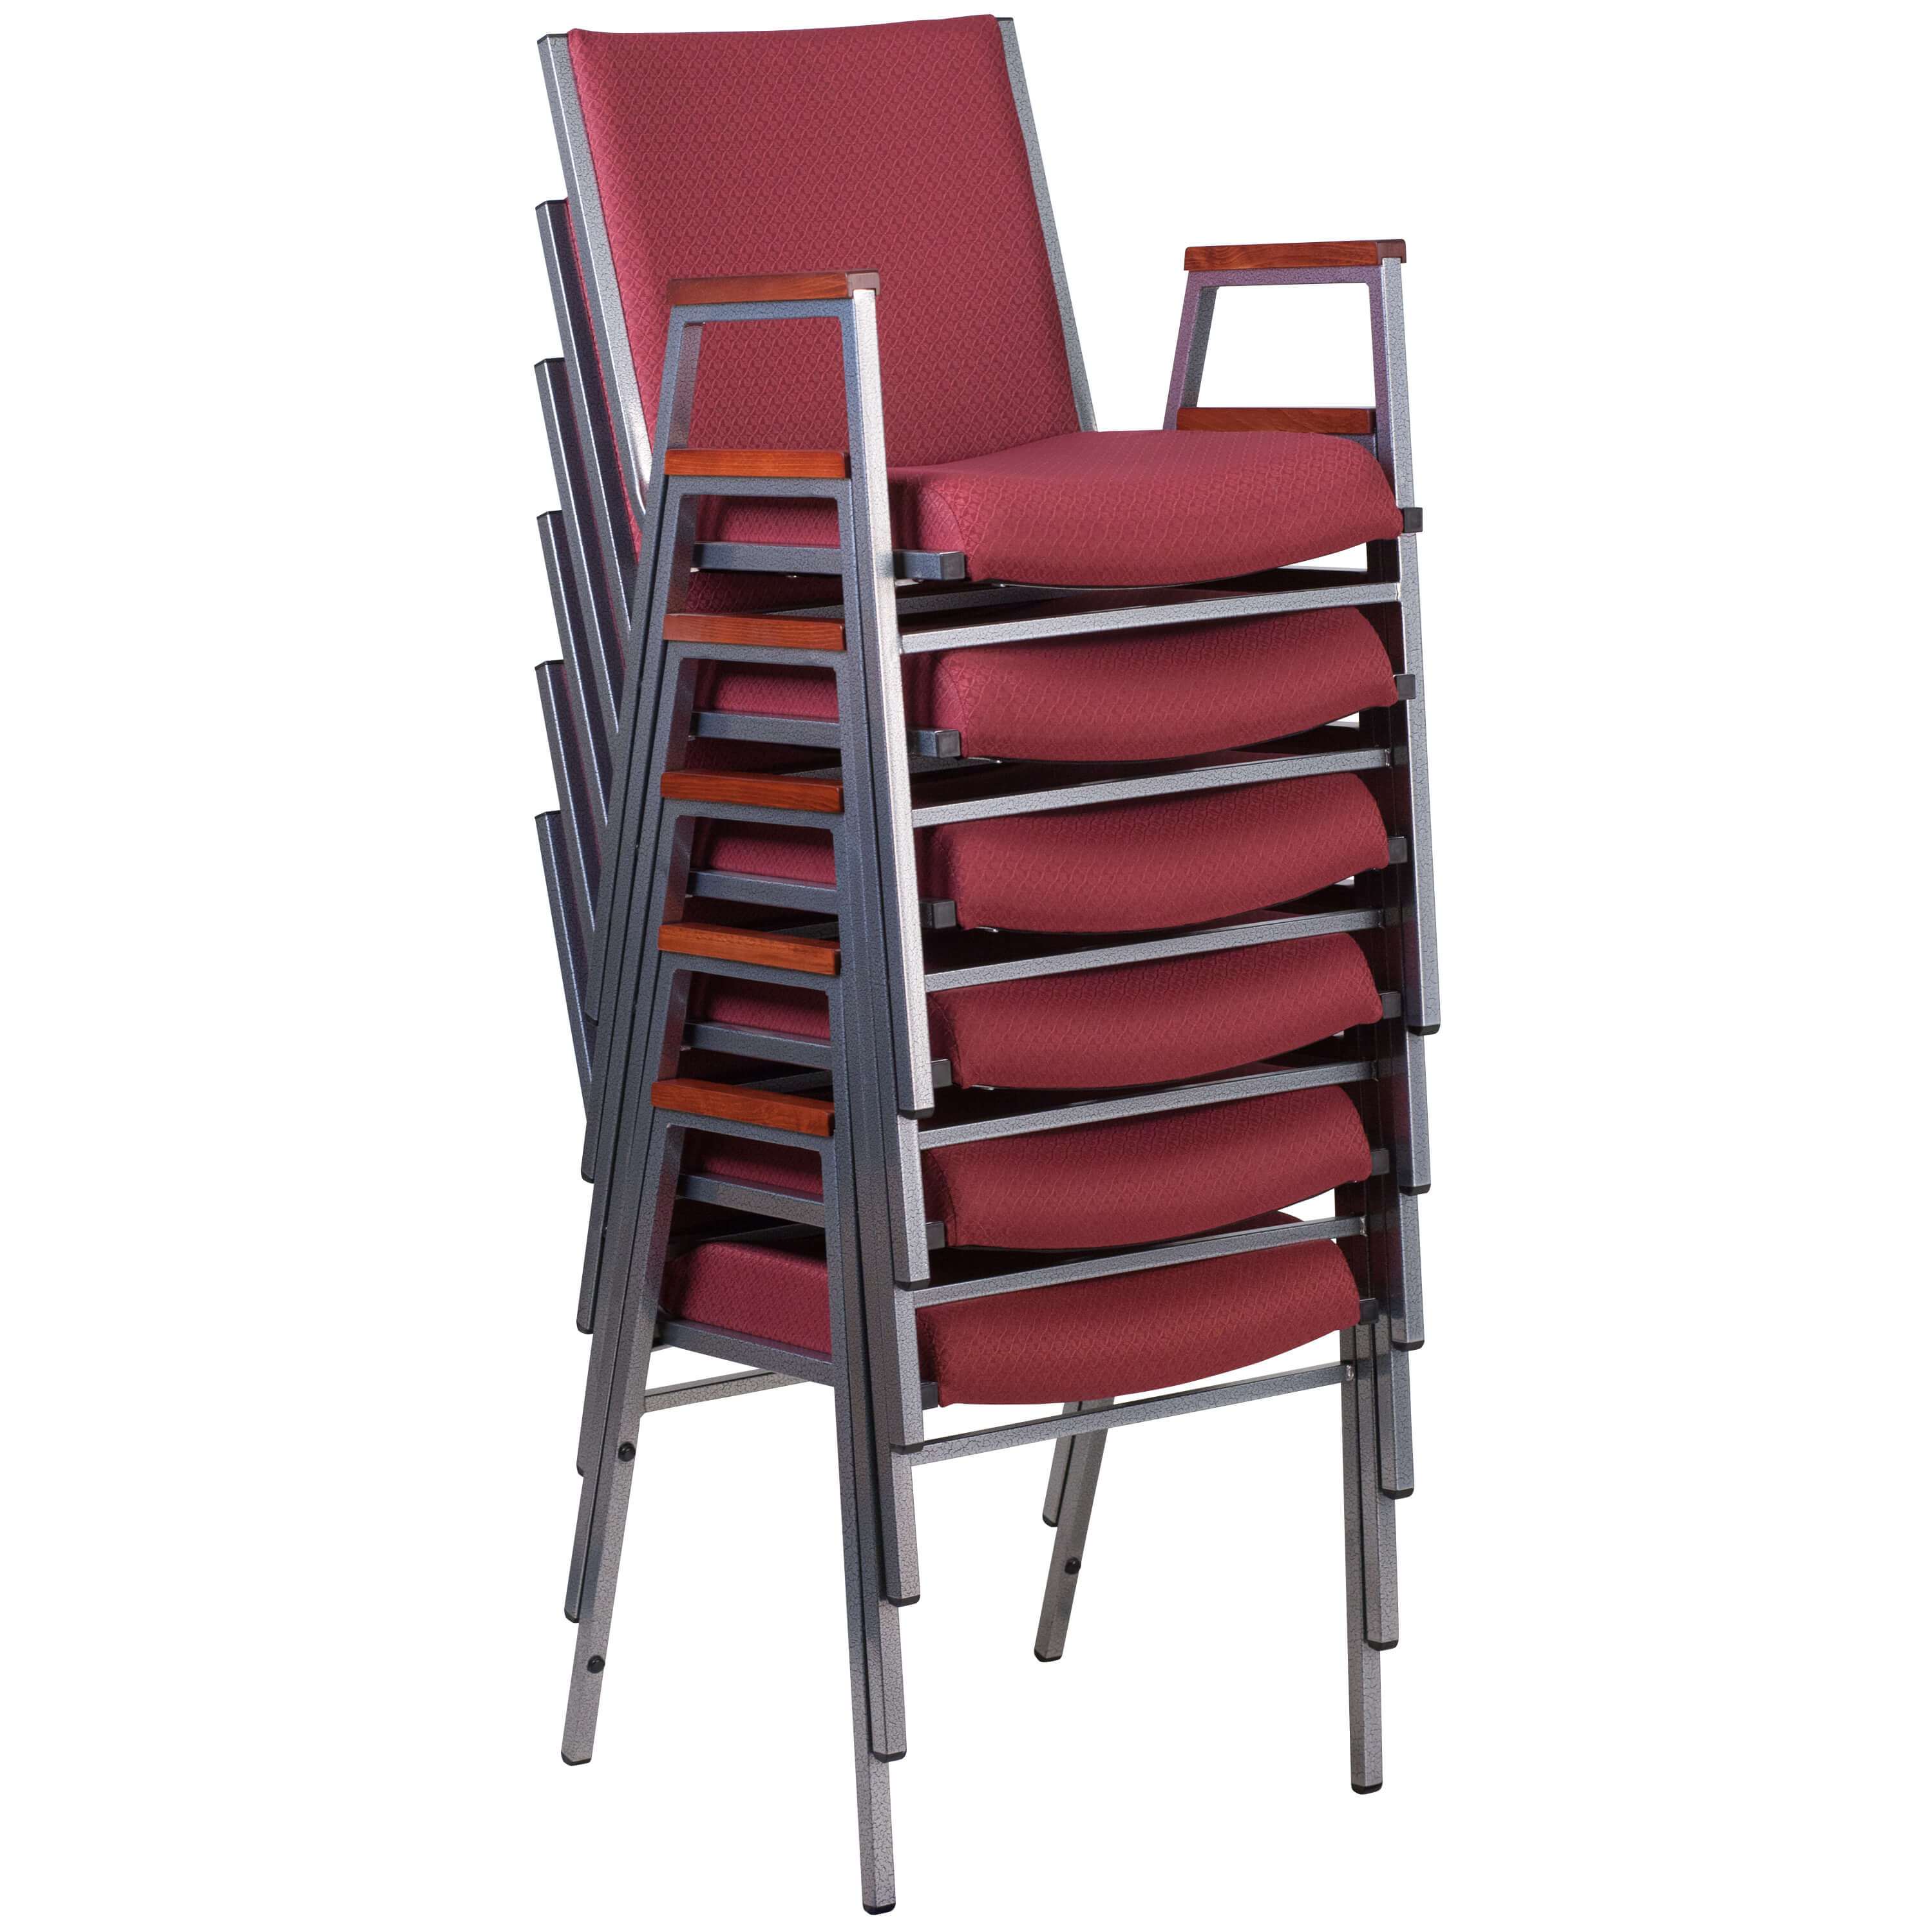 Stackable office chairs stacked